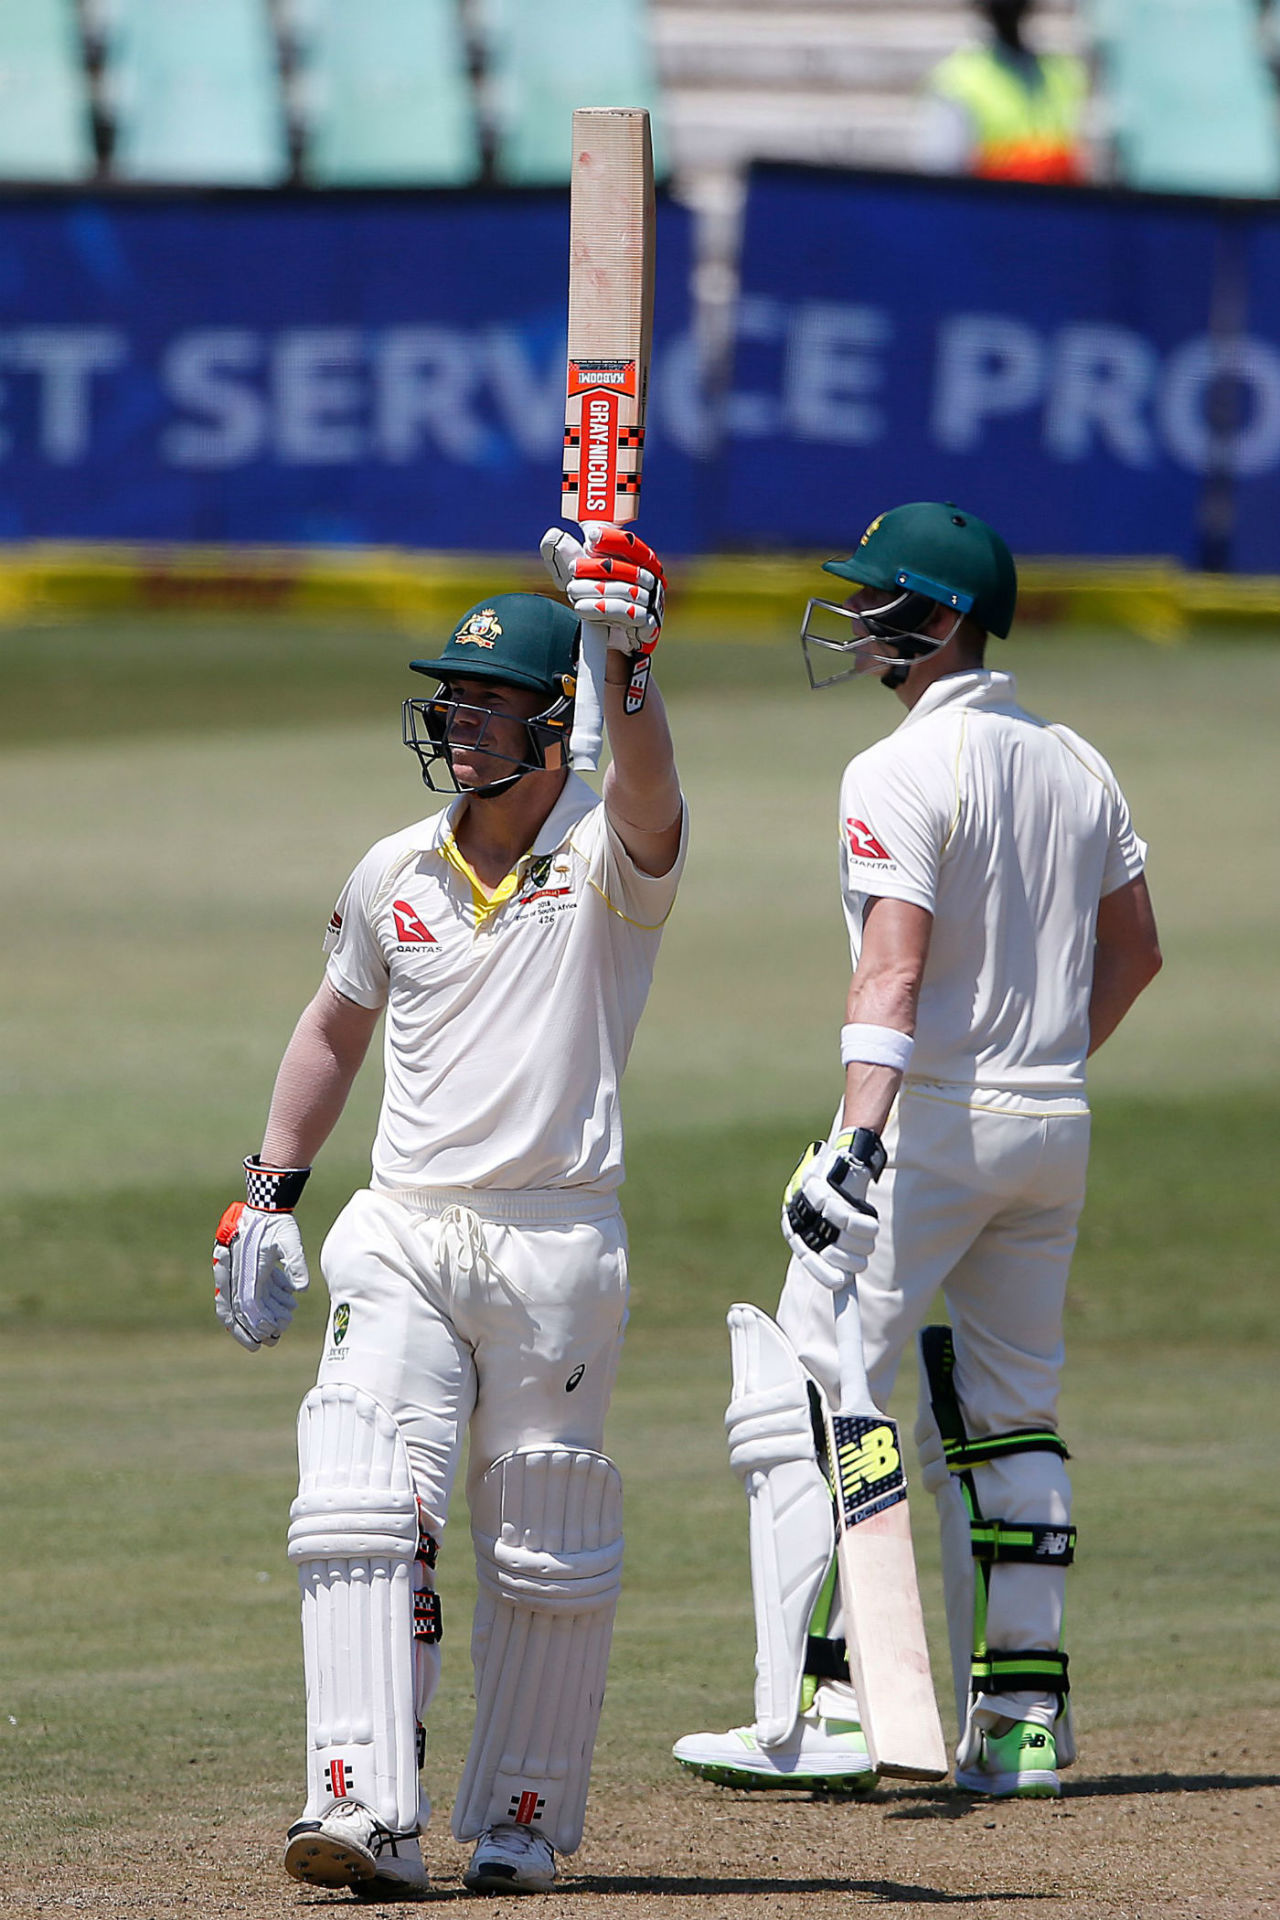 David Warner anchored Australia with a fifty on the first morning, South Africa v Australia, 1st Test, Durban, 1st day, March 1, 2018